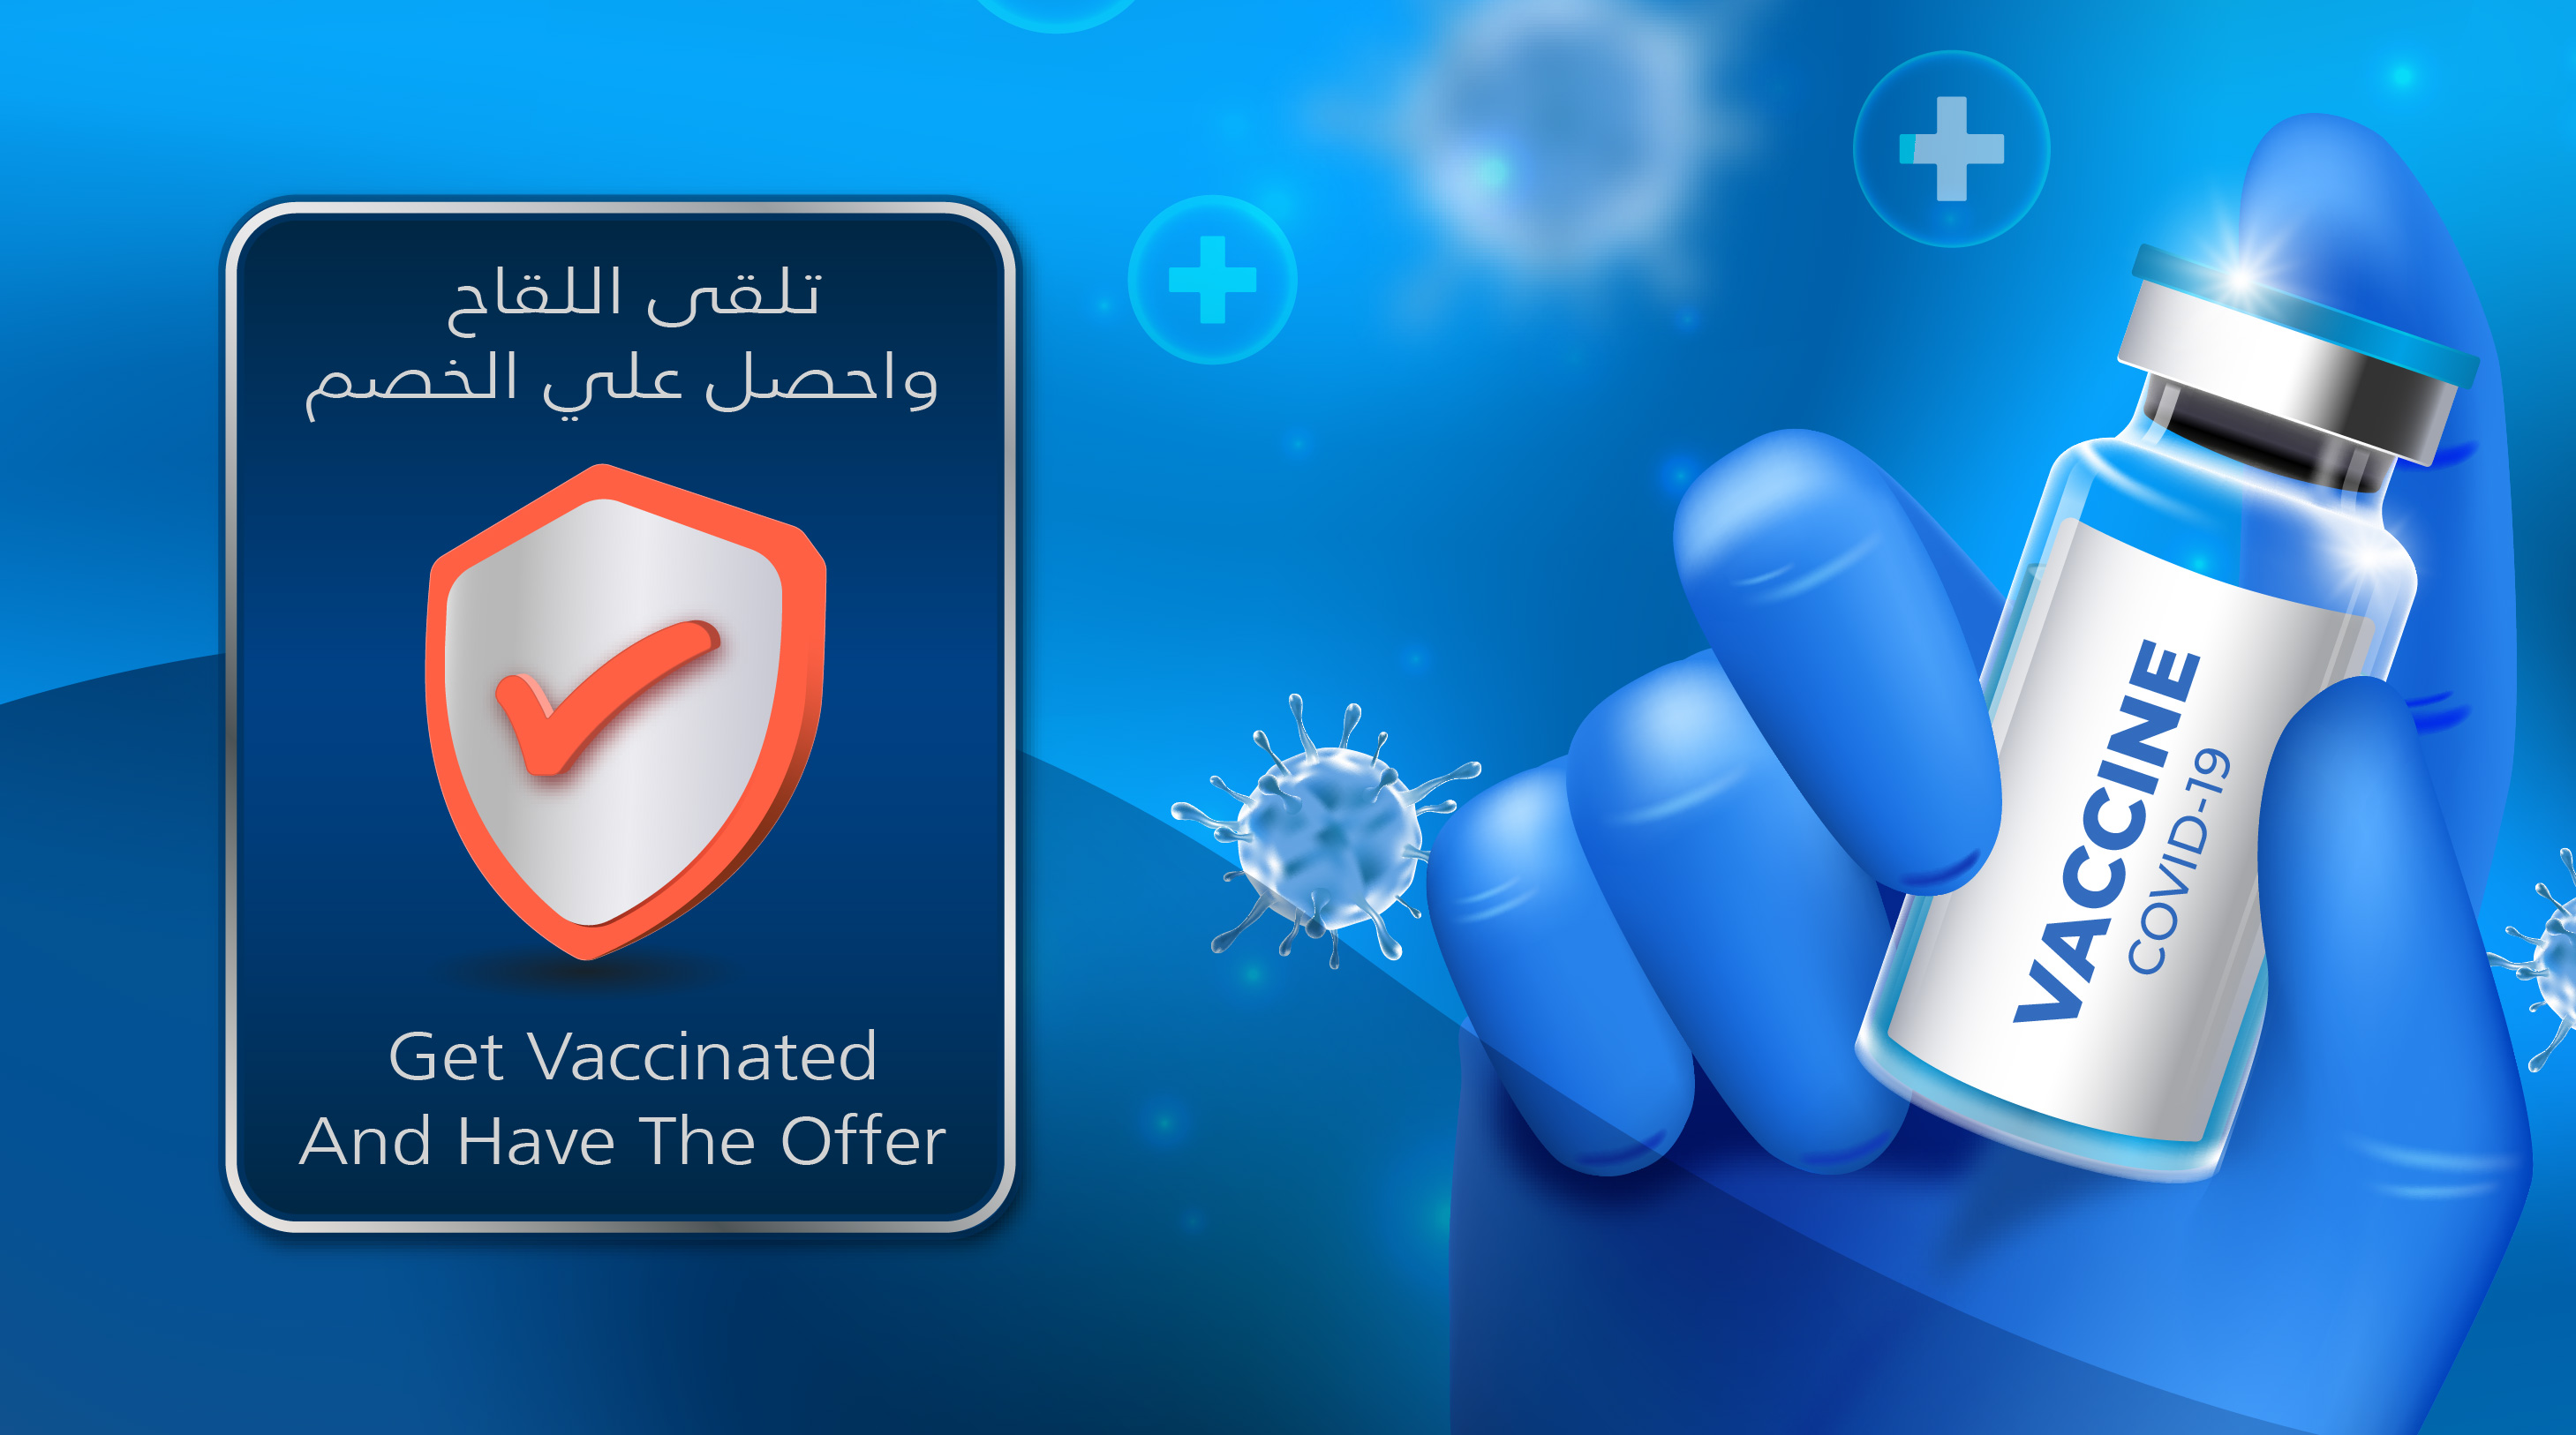 discount for people who received two doses of covid-19 vaccine